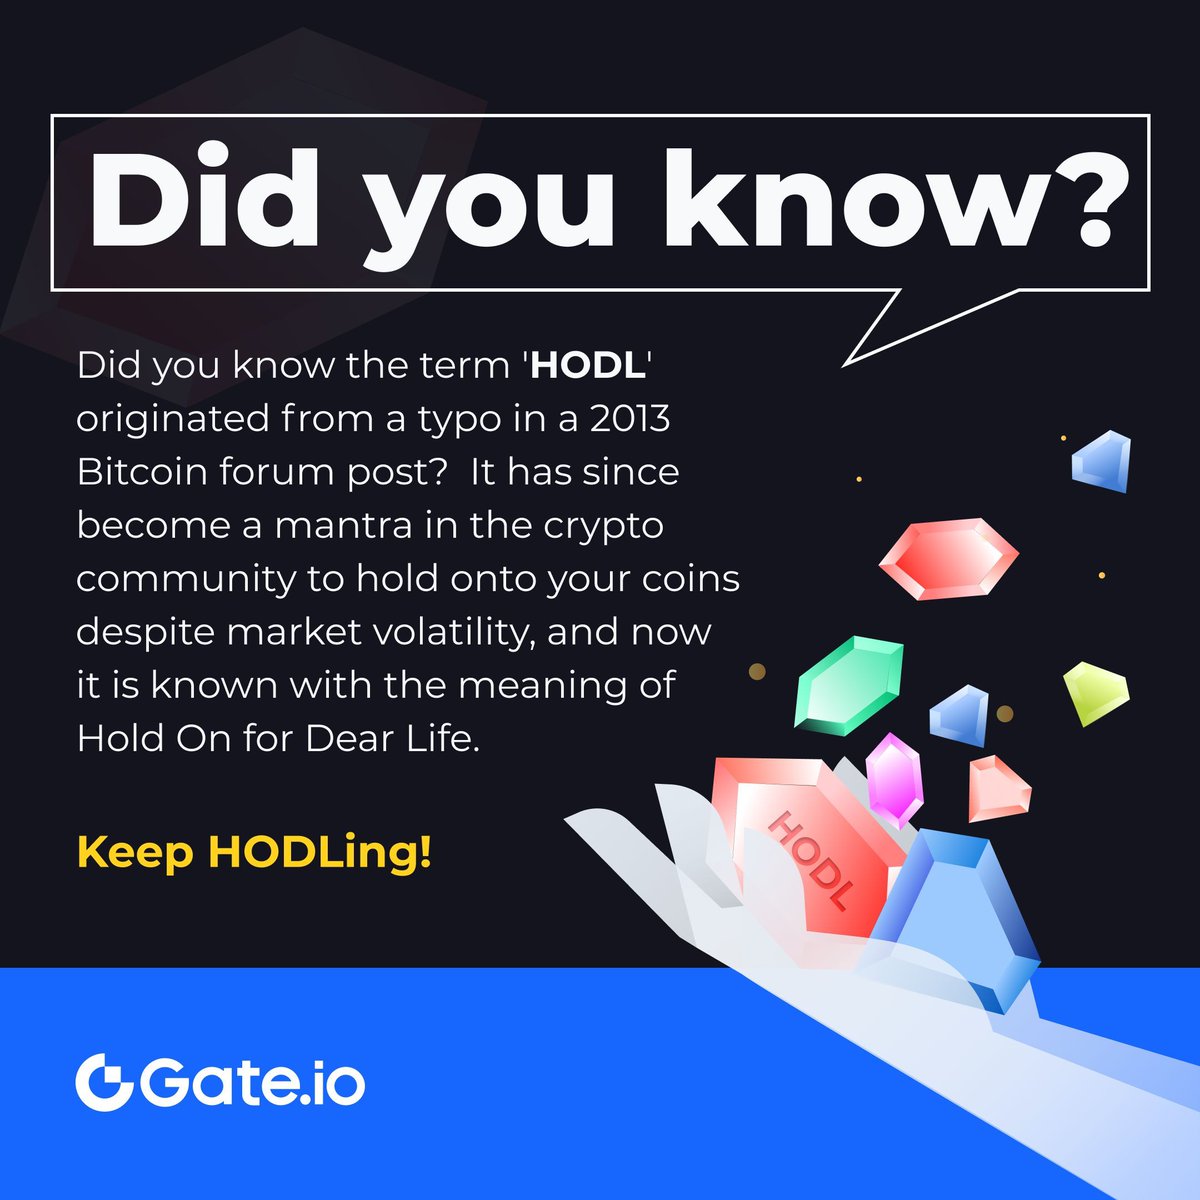 Now you know!😉 Which #cryptocurrencies are worth #HODLing right now? #Gateio #Didyouknow #HODL